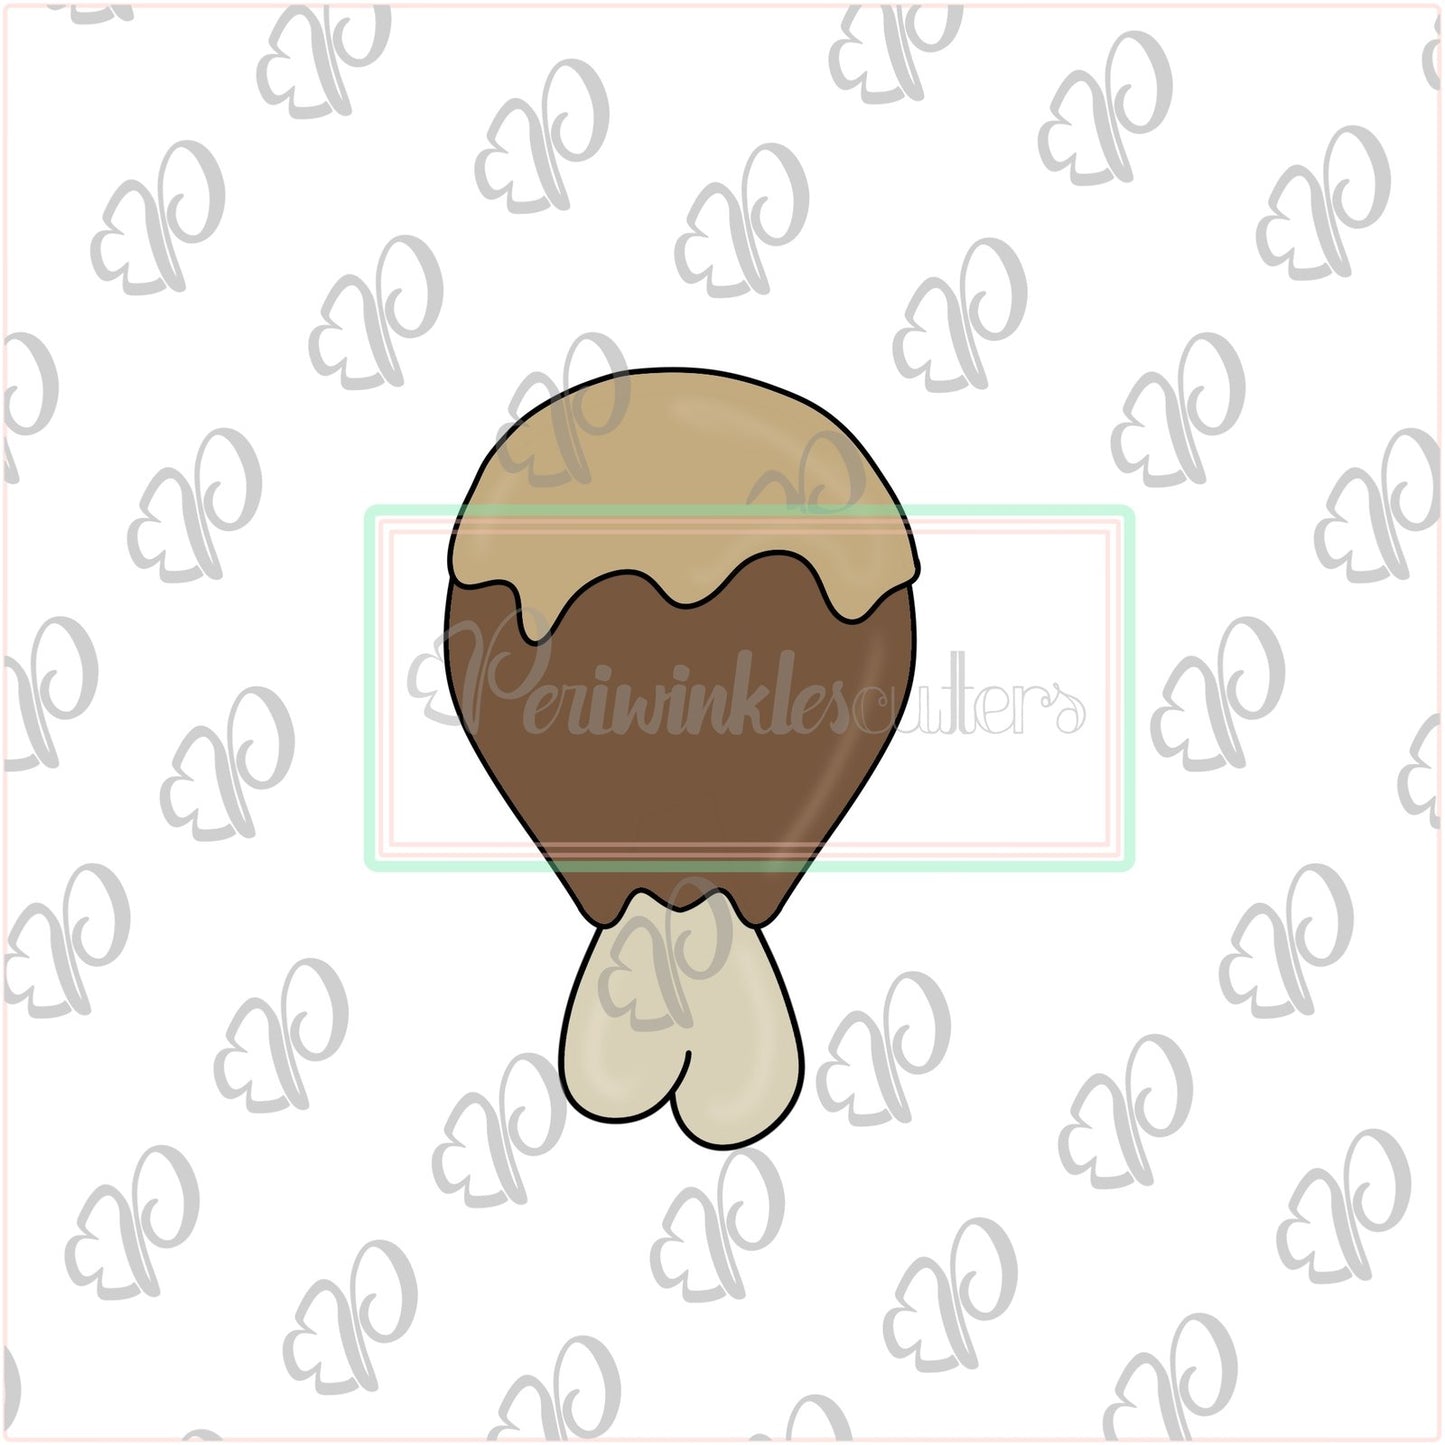 Chubby Turkey Leg Cookie Cutter - Periwinkles Cutters